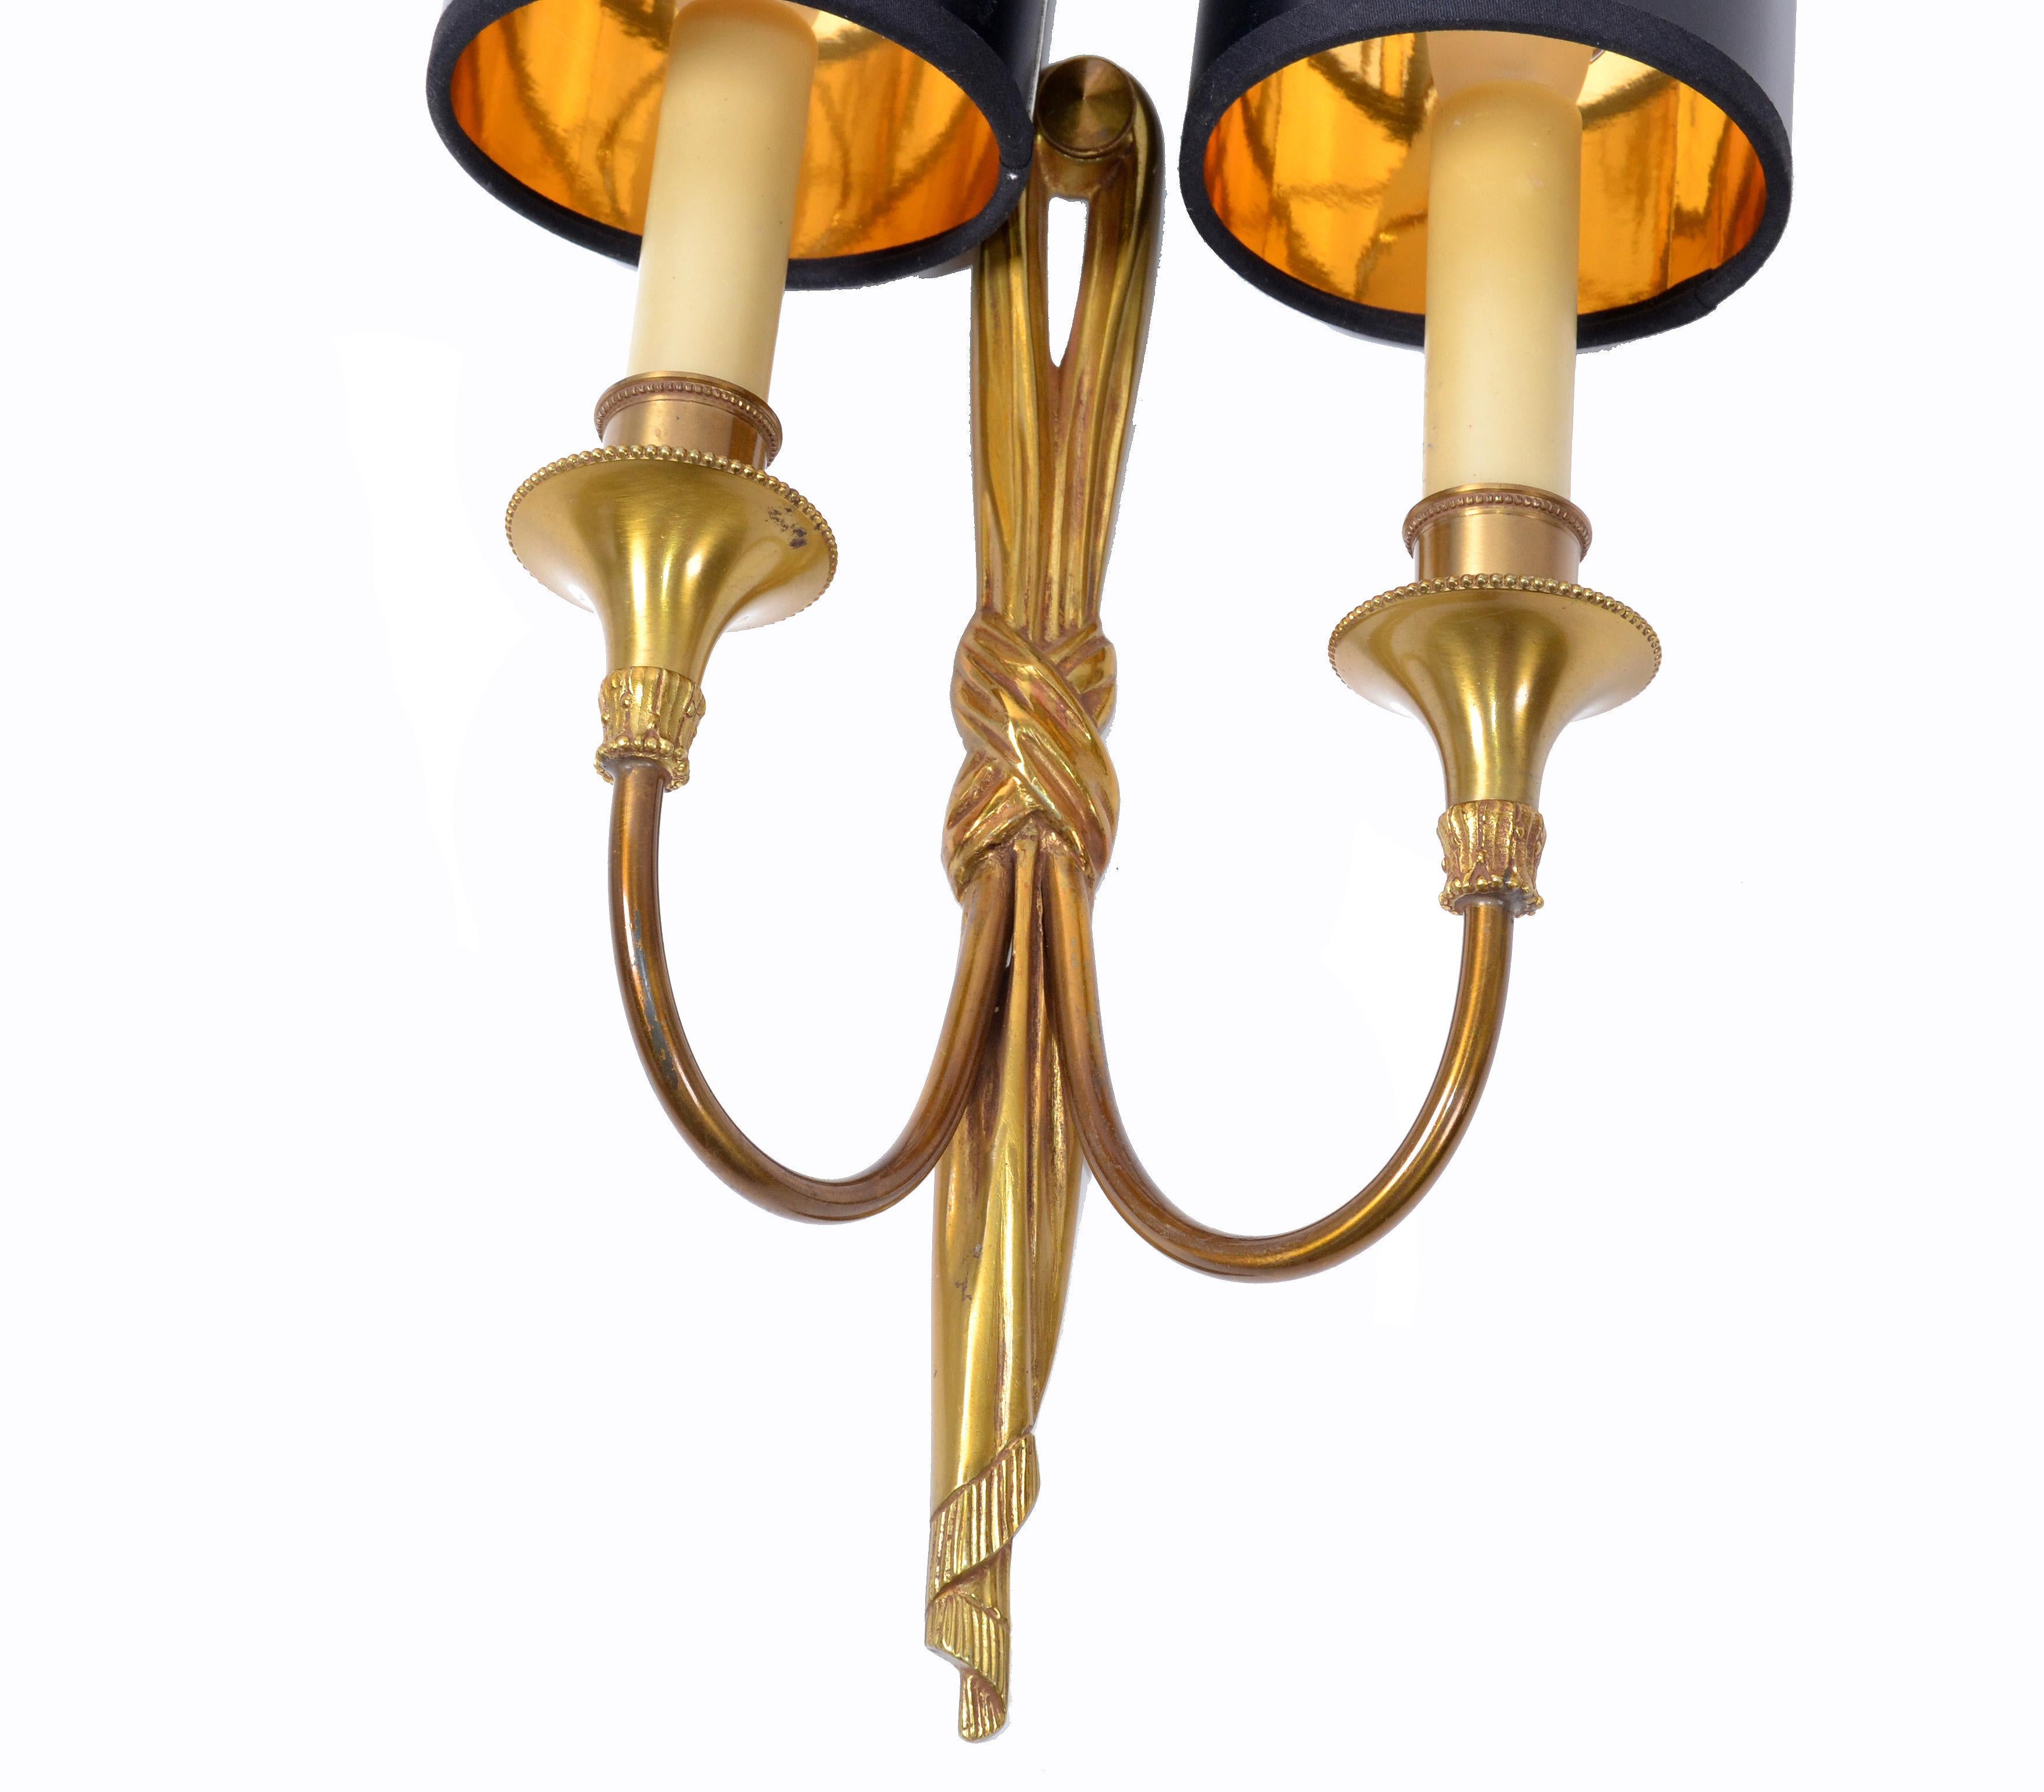 Maison Charles French Bronze Drapes Sconces France 1950s, 2 Pair Available 1